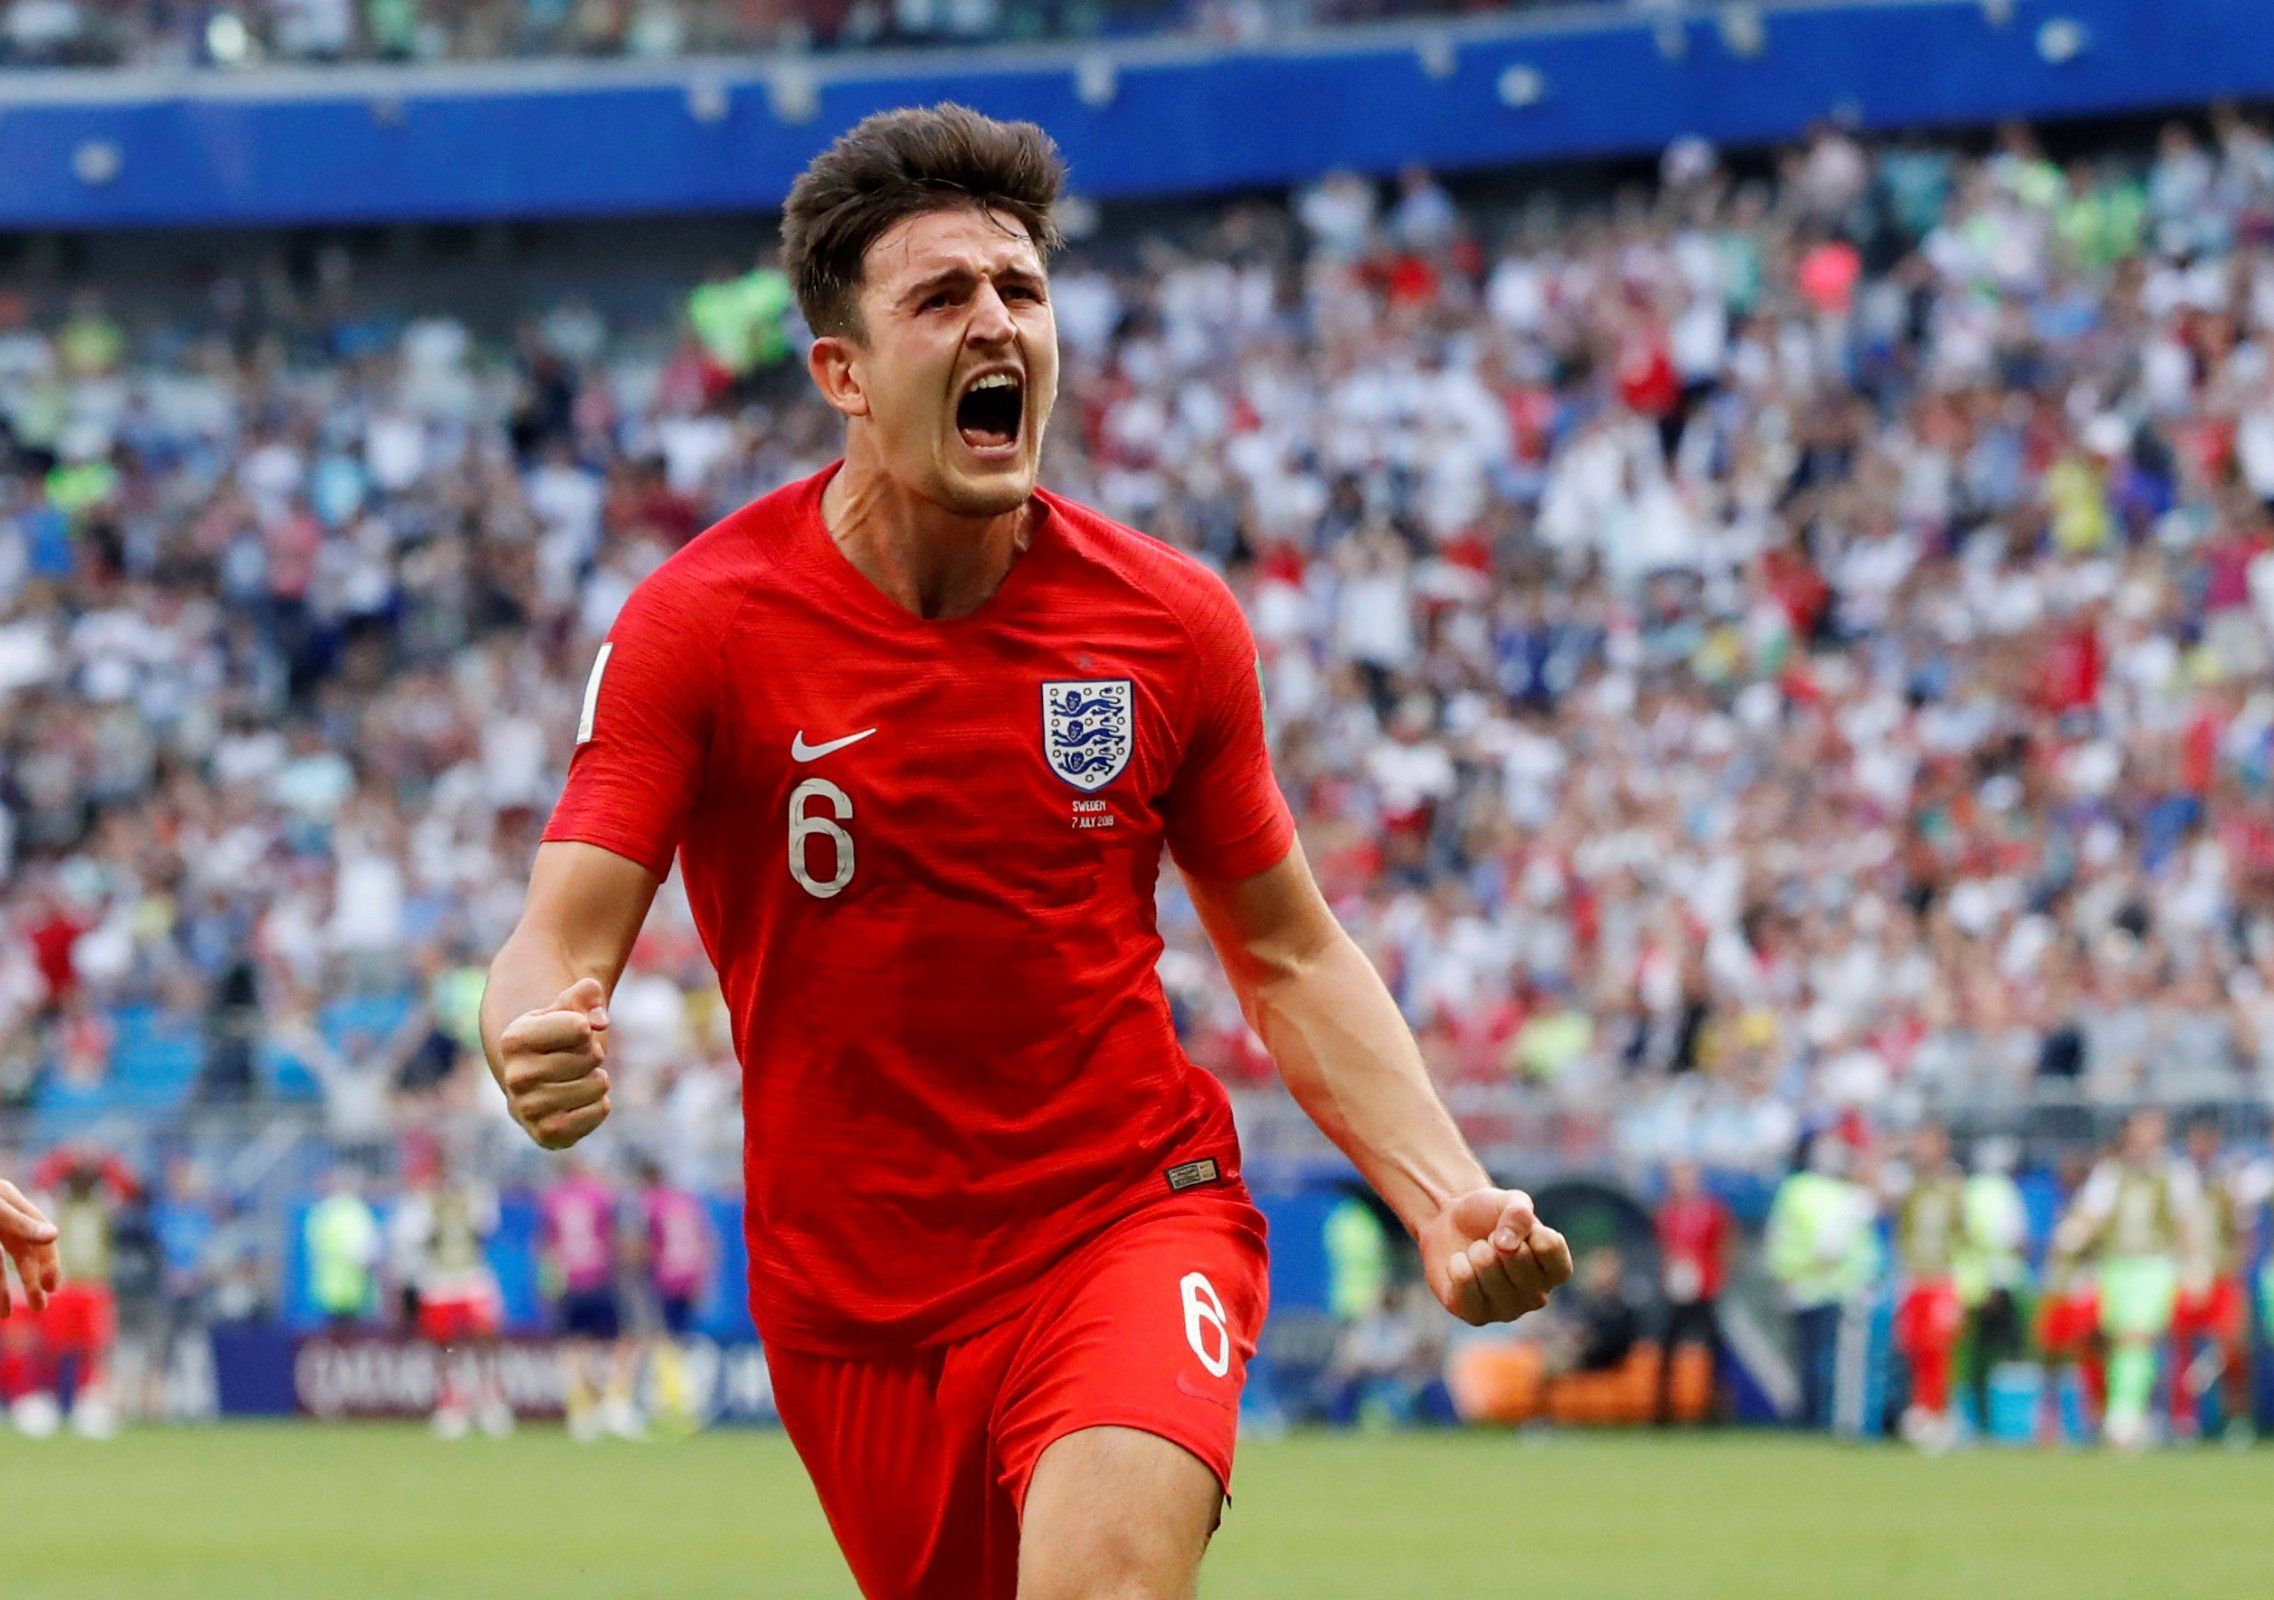 Harry Maguire celebrates scoring for England against Sweden at the World Cup